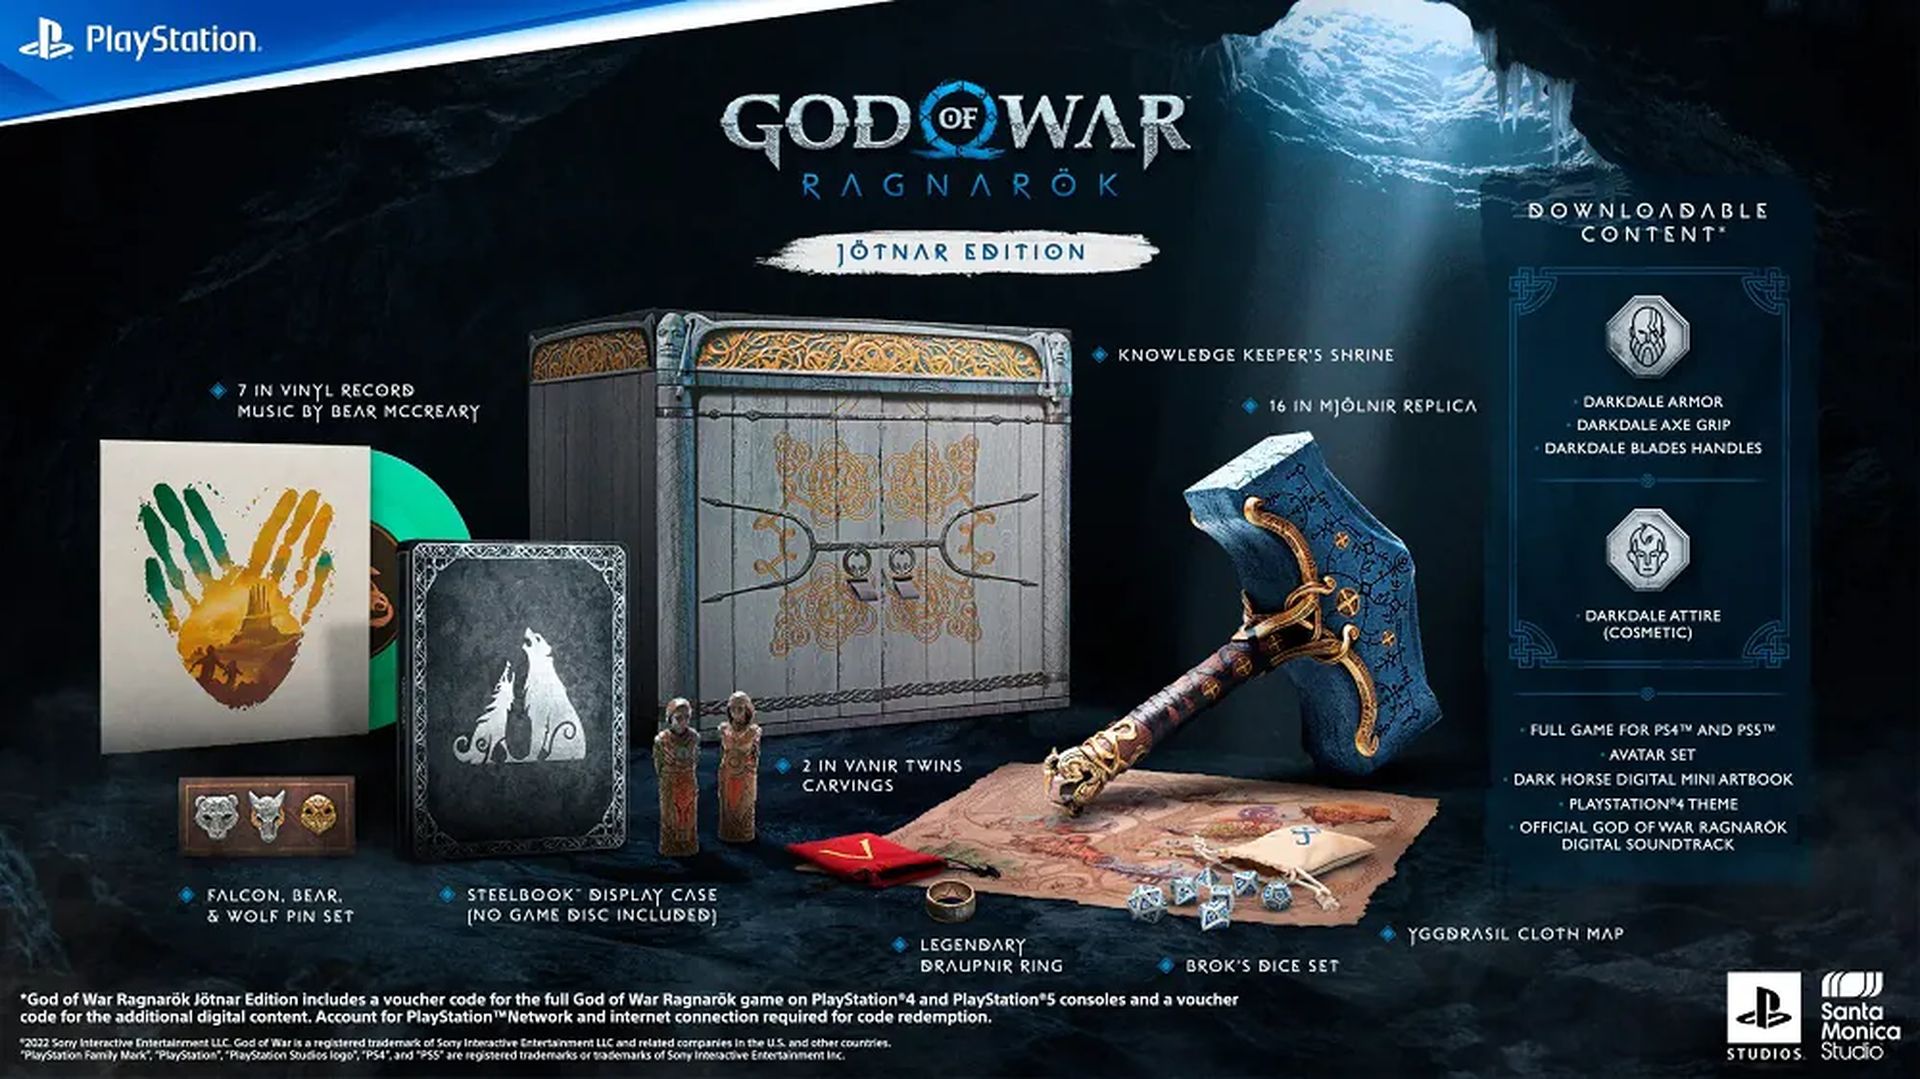 God of War Jötnar Edition is here with a trailer, just after we've learned the sequel game called Father and Son trailer has been released on the official PlayStation blog.